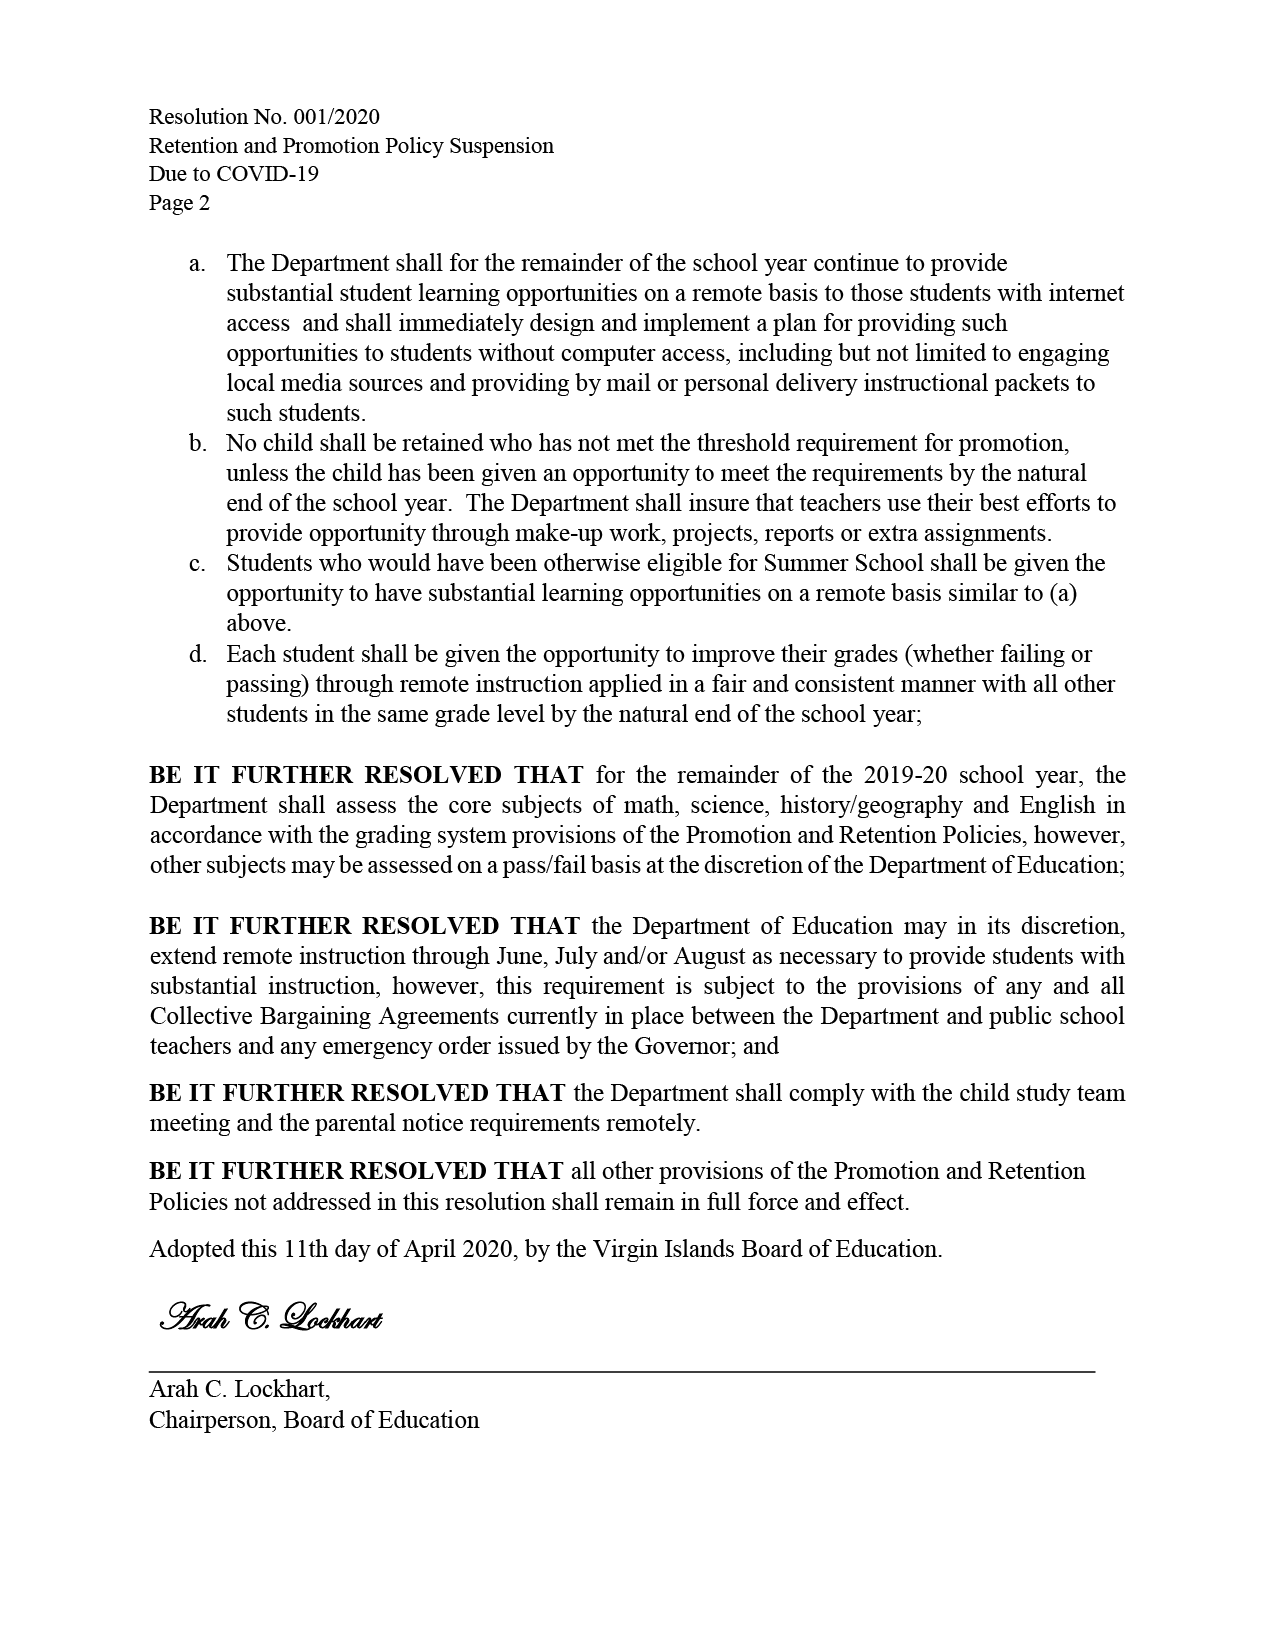 APPROVED RESOLUTION 0012020 POLICY SUSPENSION IN RESPONSE TO COVID-191 Signed-02.png